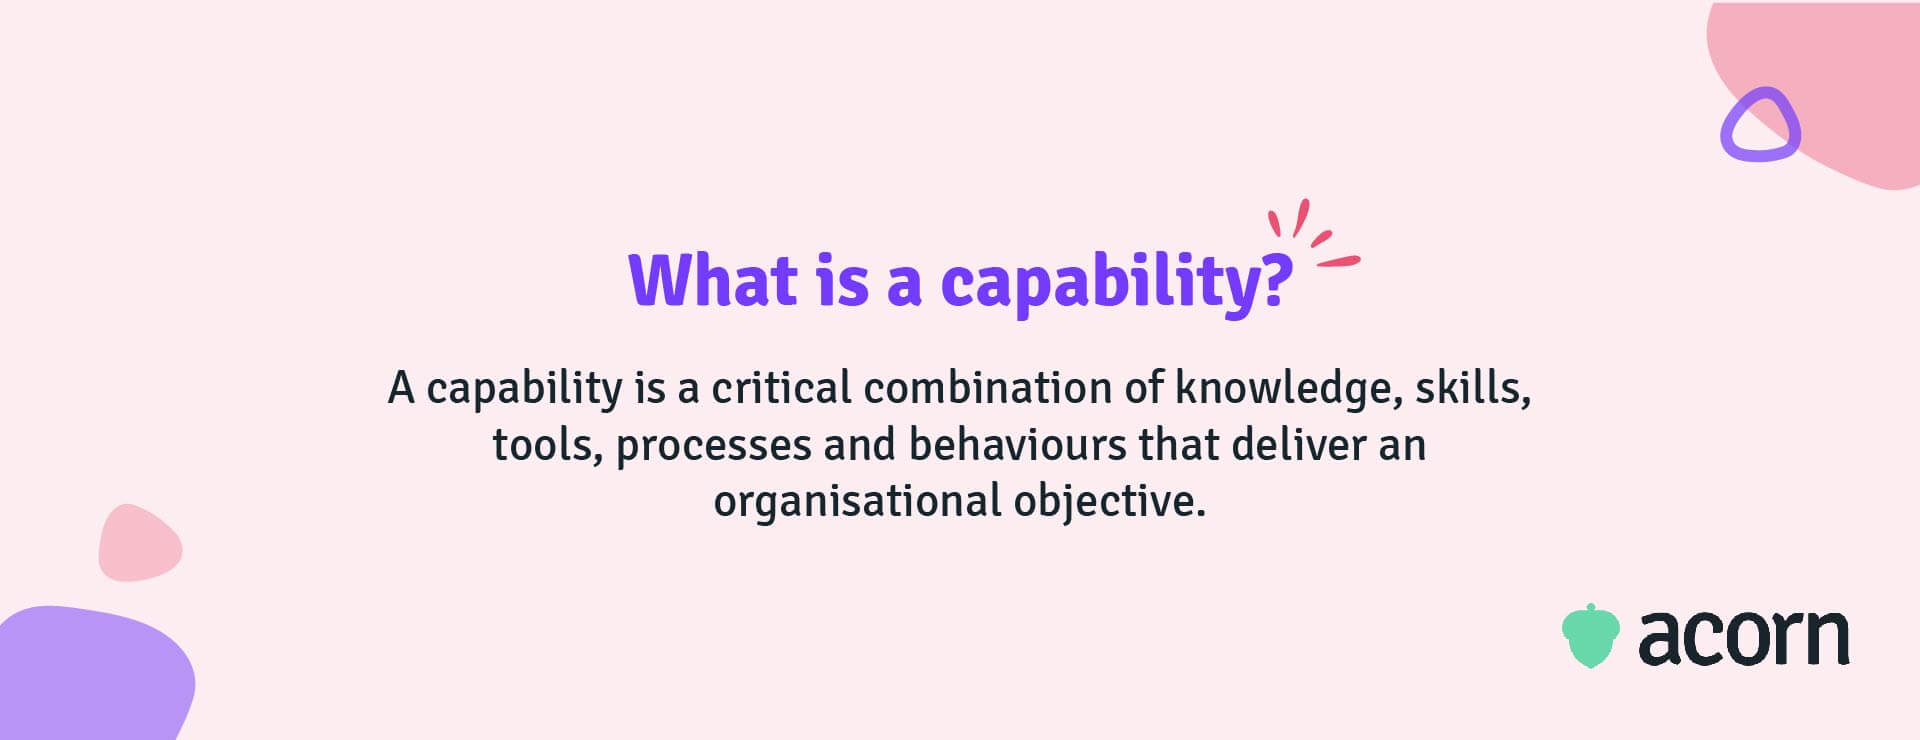 What is a capability? 